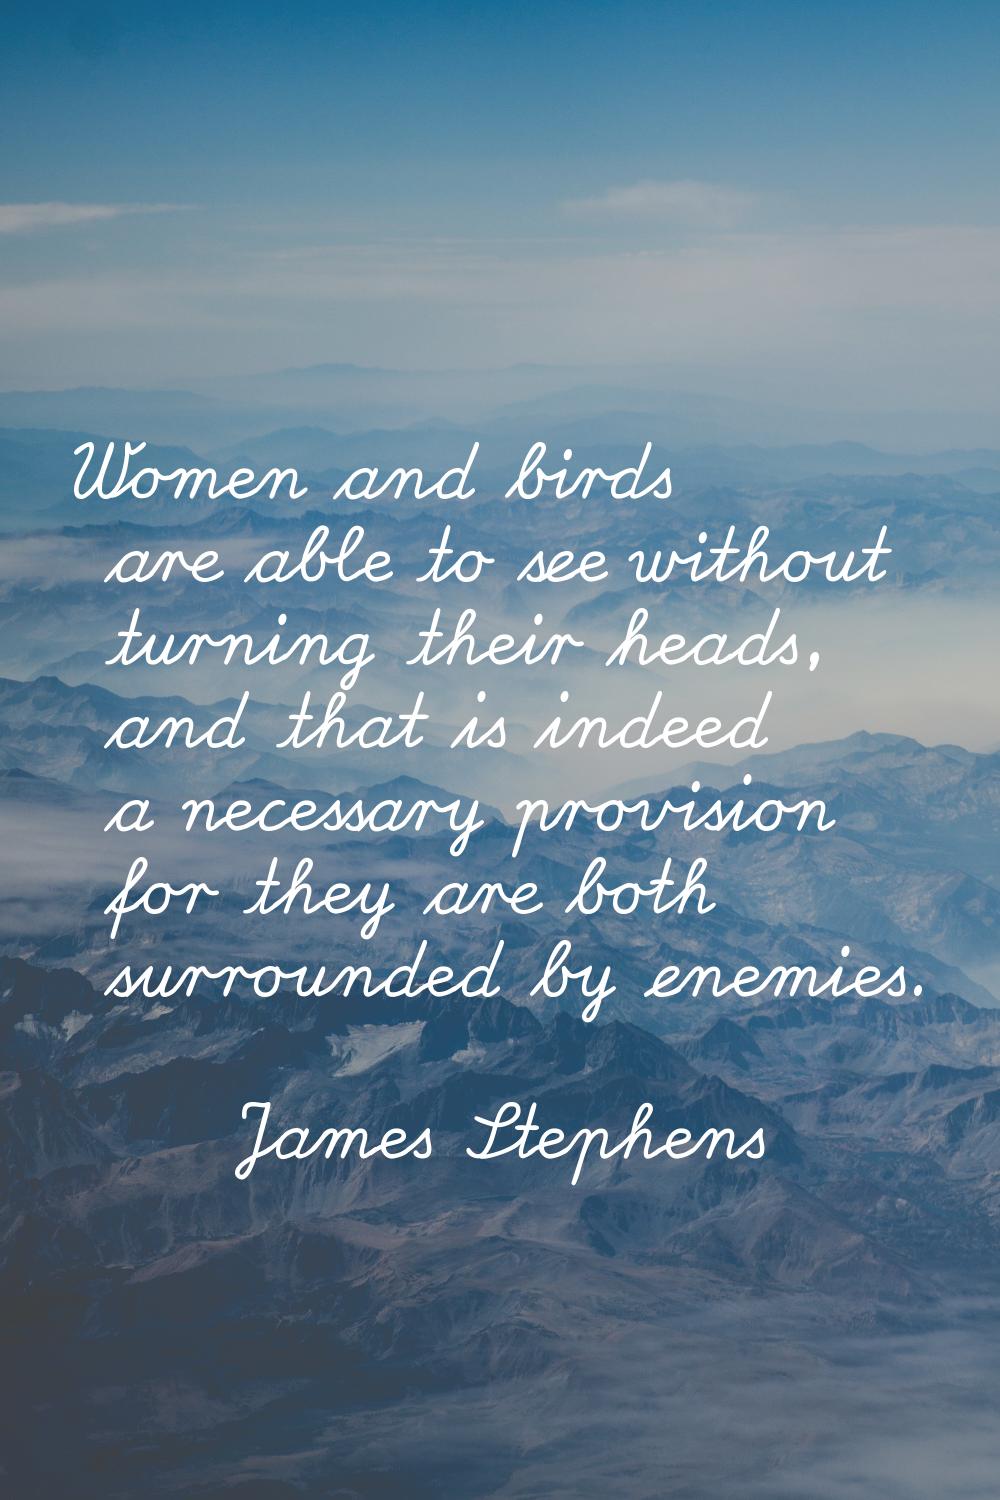 Women and birds are able to see without turning their heads, and that is indeed a necessary provisi